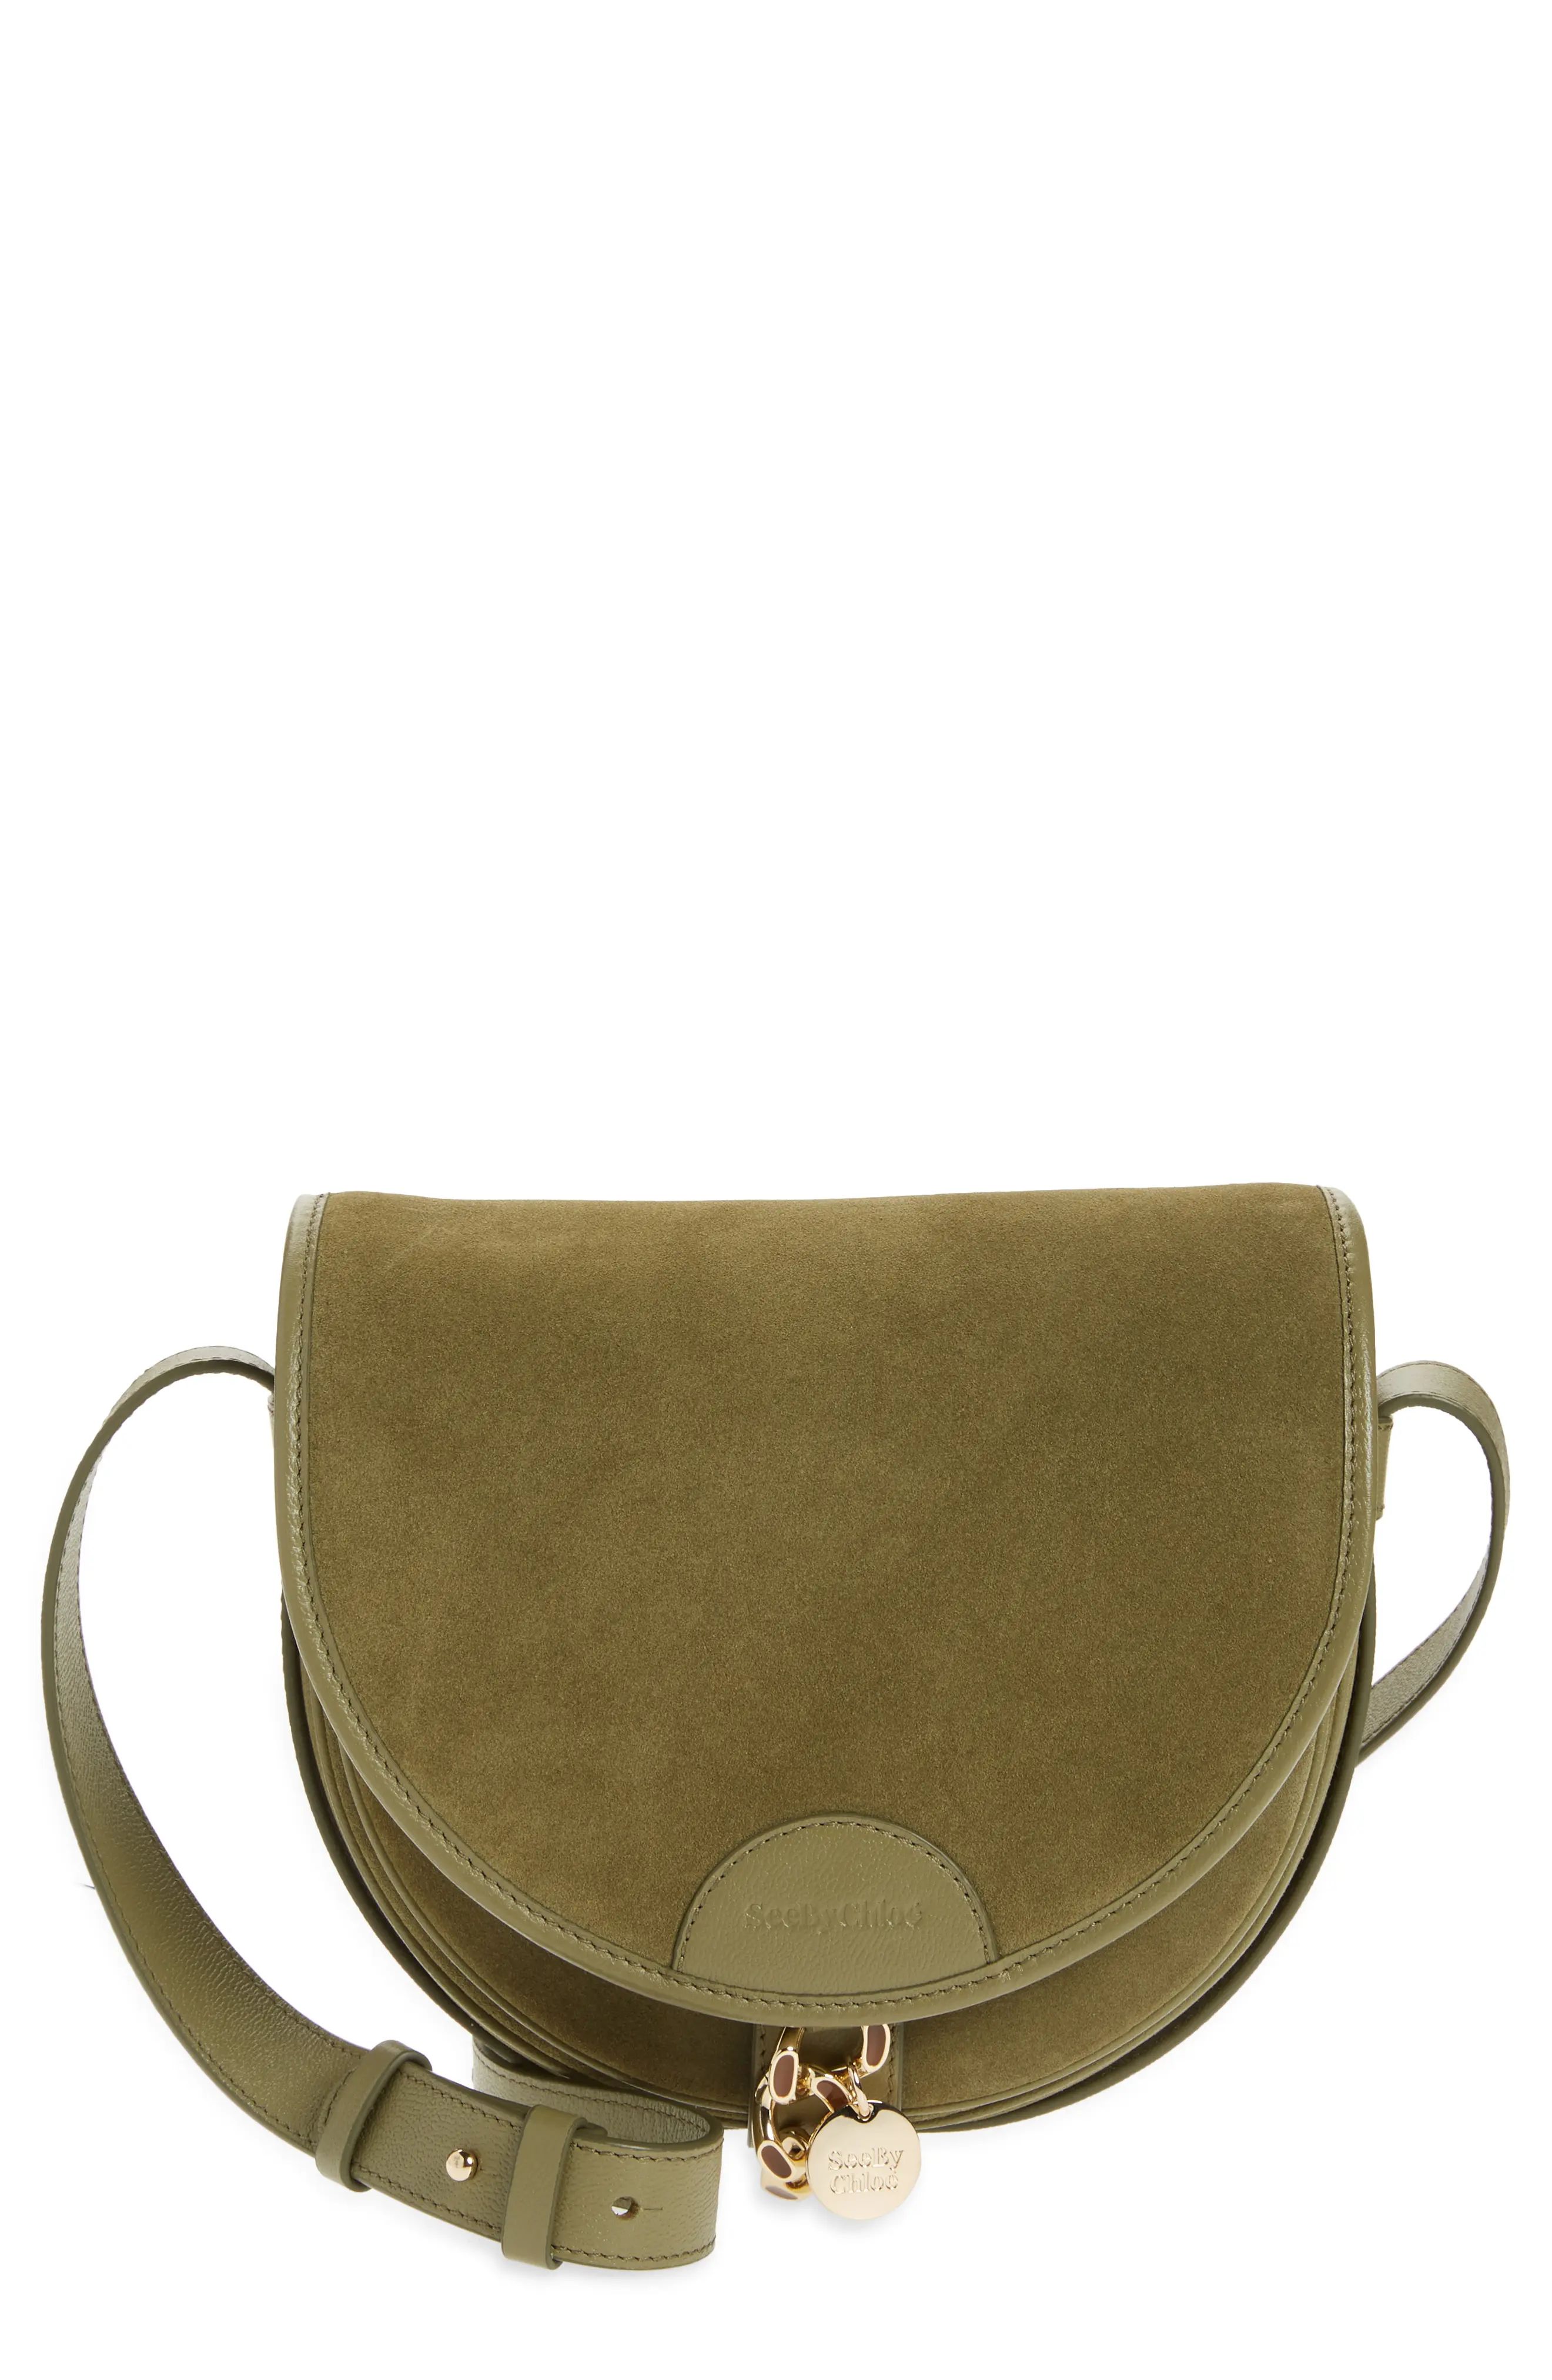 See by Chloe Mara Leather Saddle Bag in Aloe Green at Nordstrom | Nordstrom